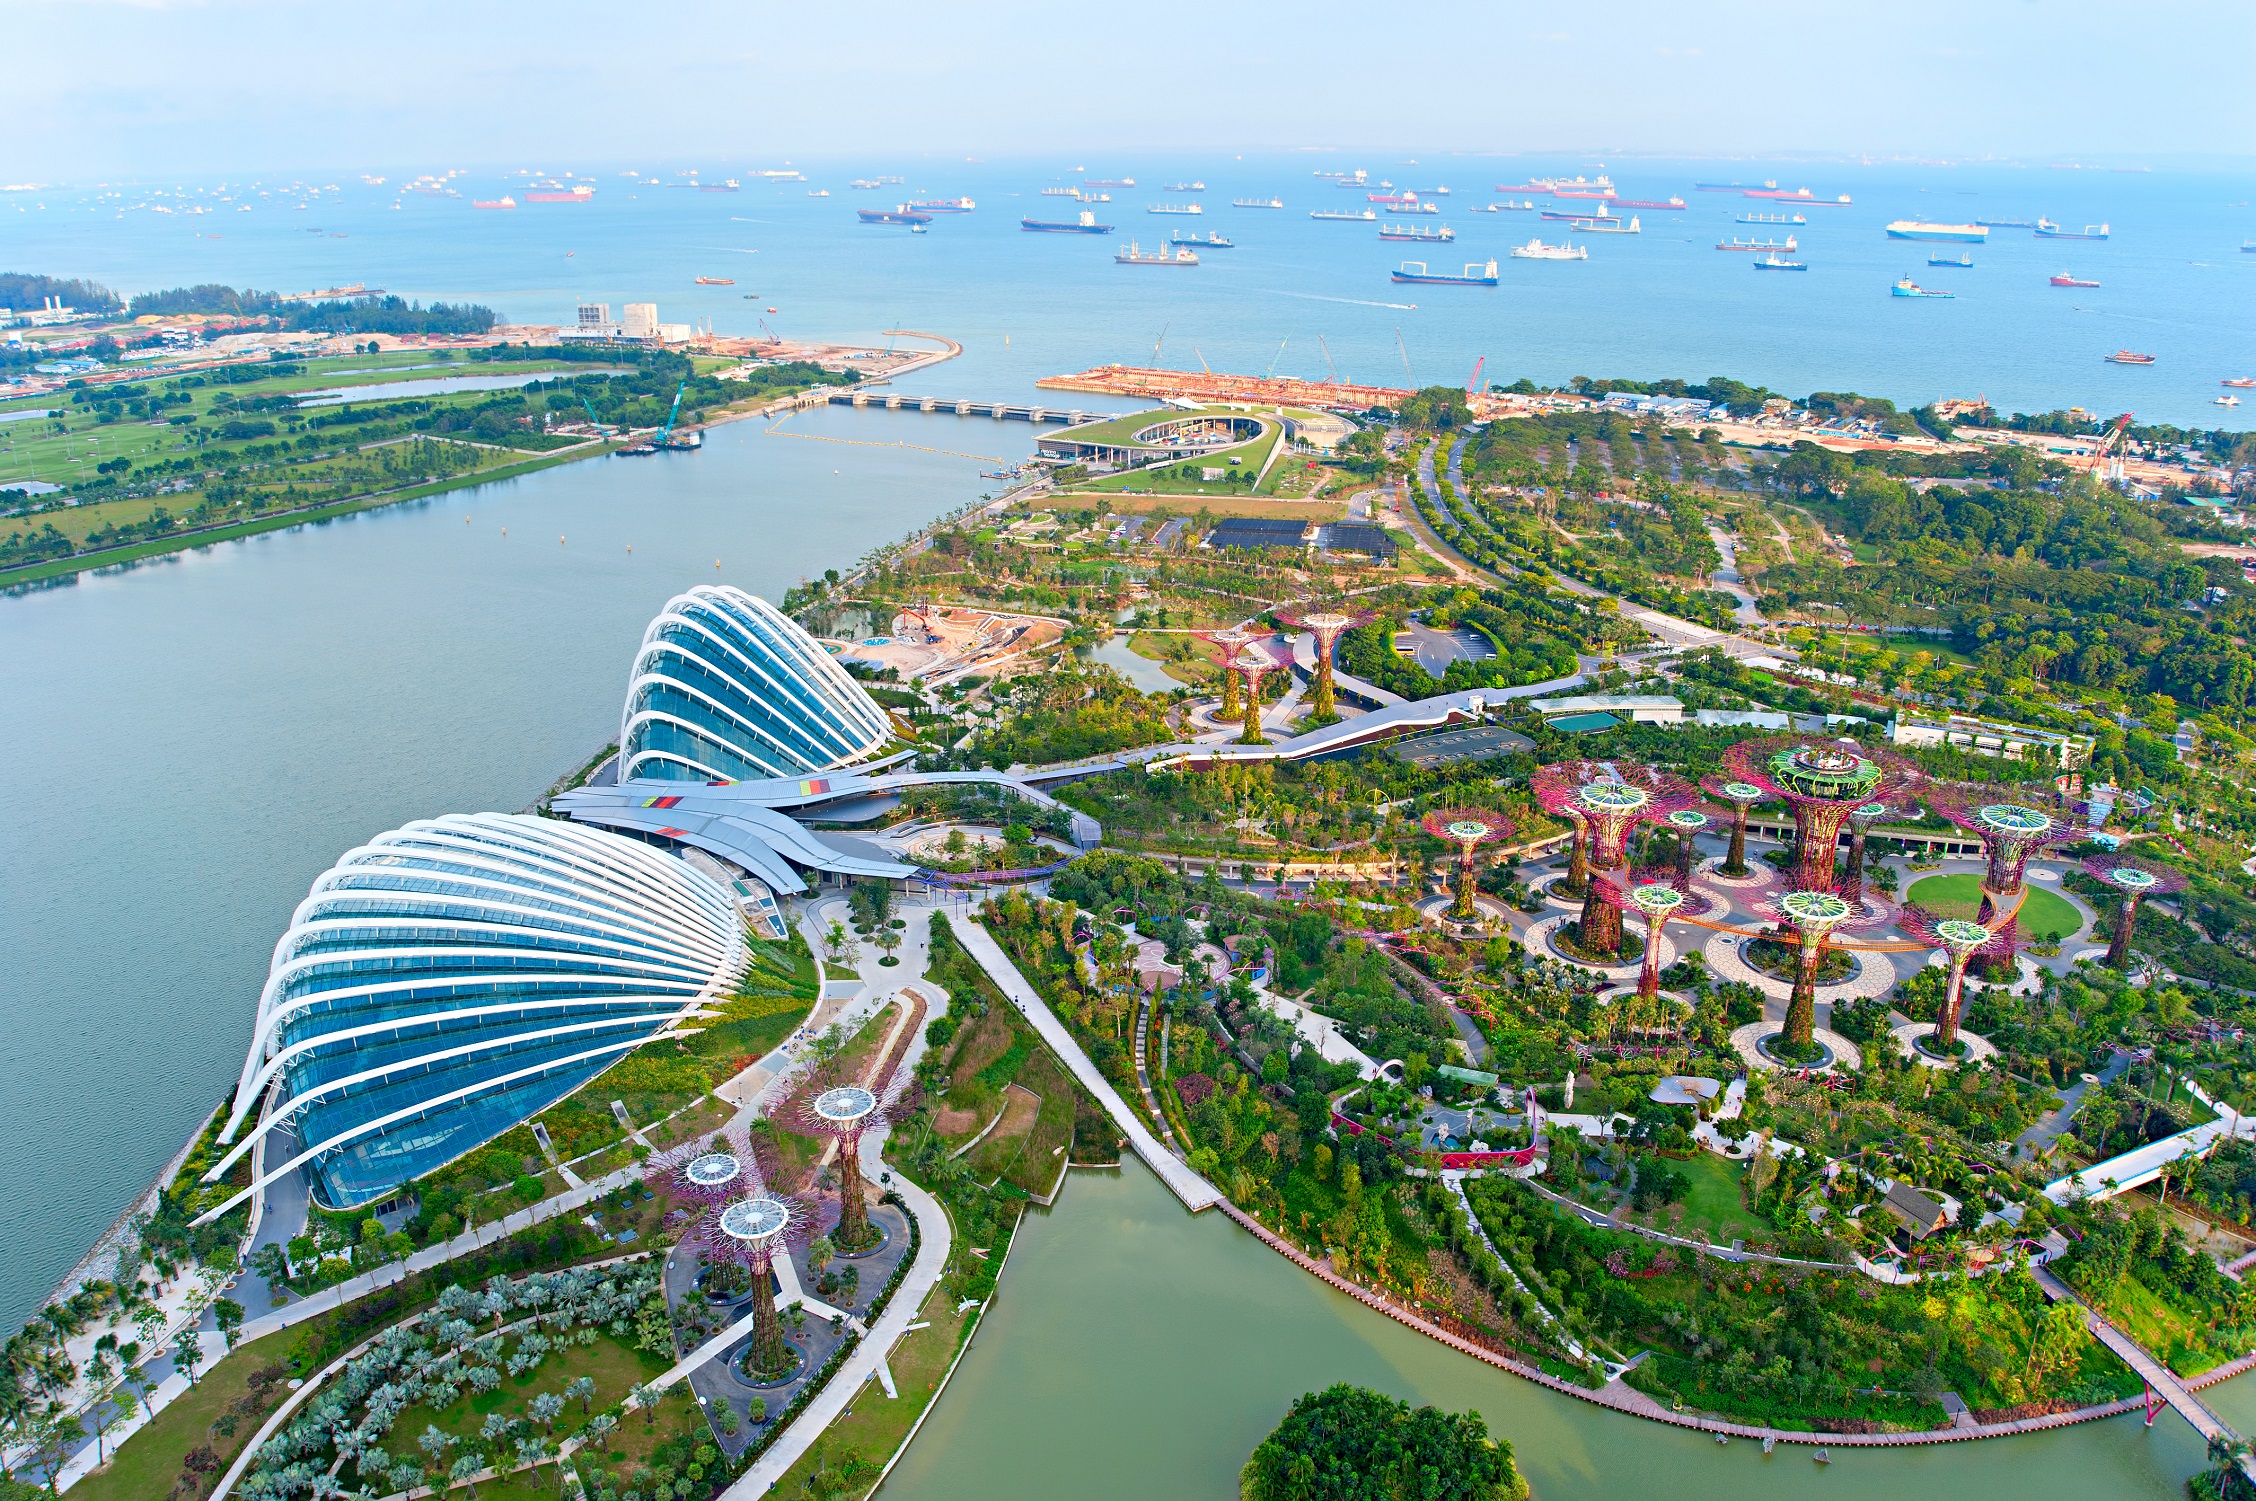 sightseeing-in-singapore-on-a-holiday-15-attractions-in-1-trip